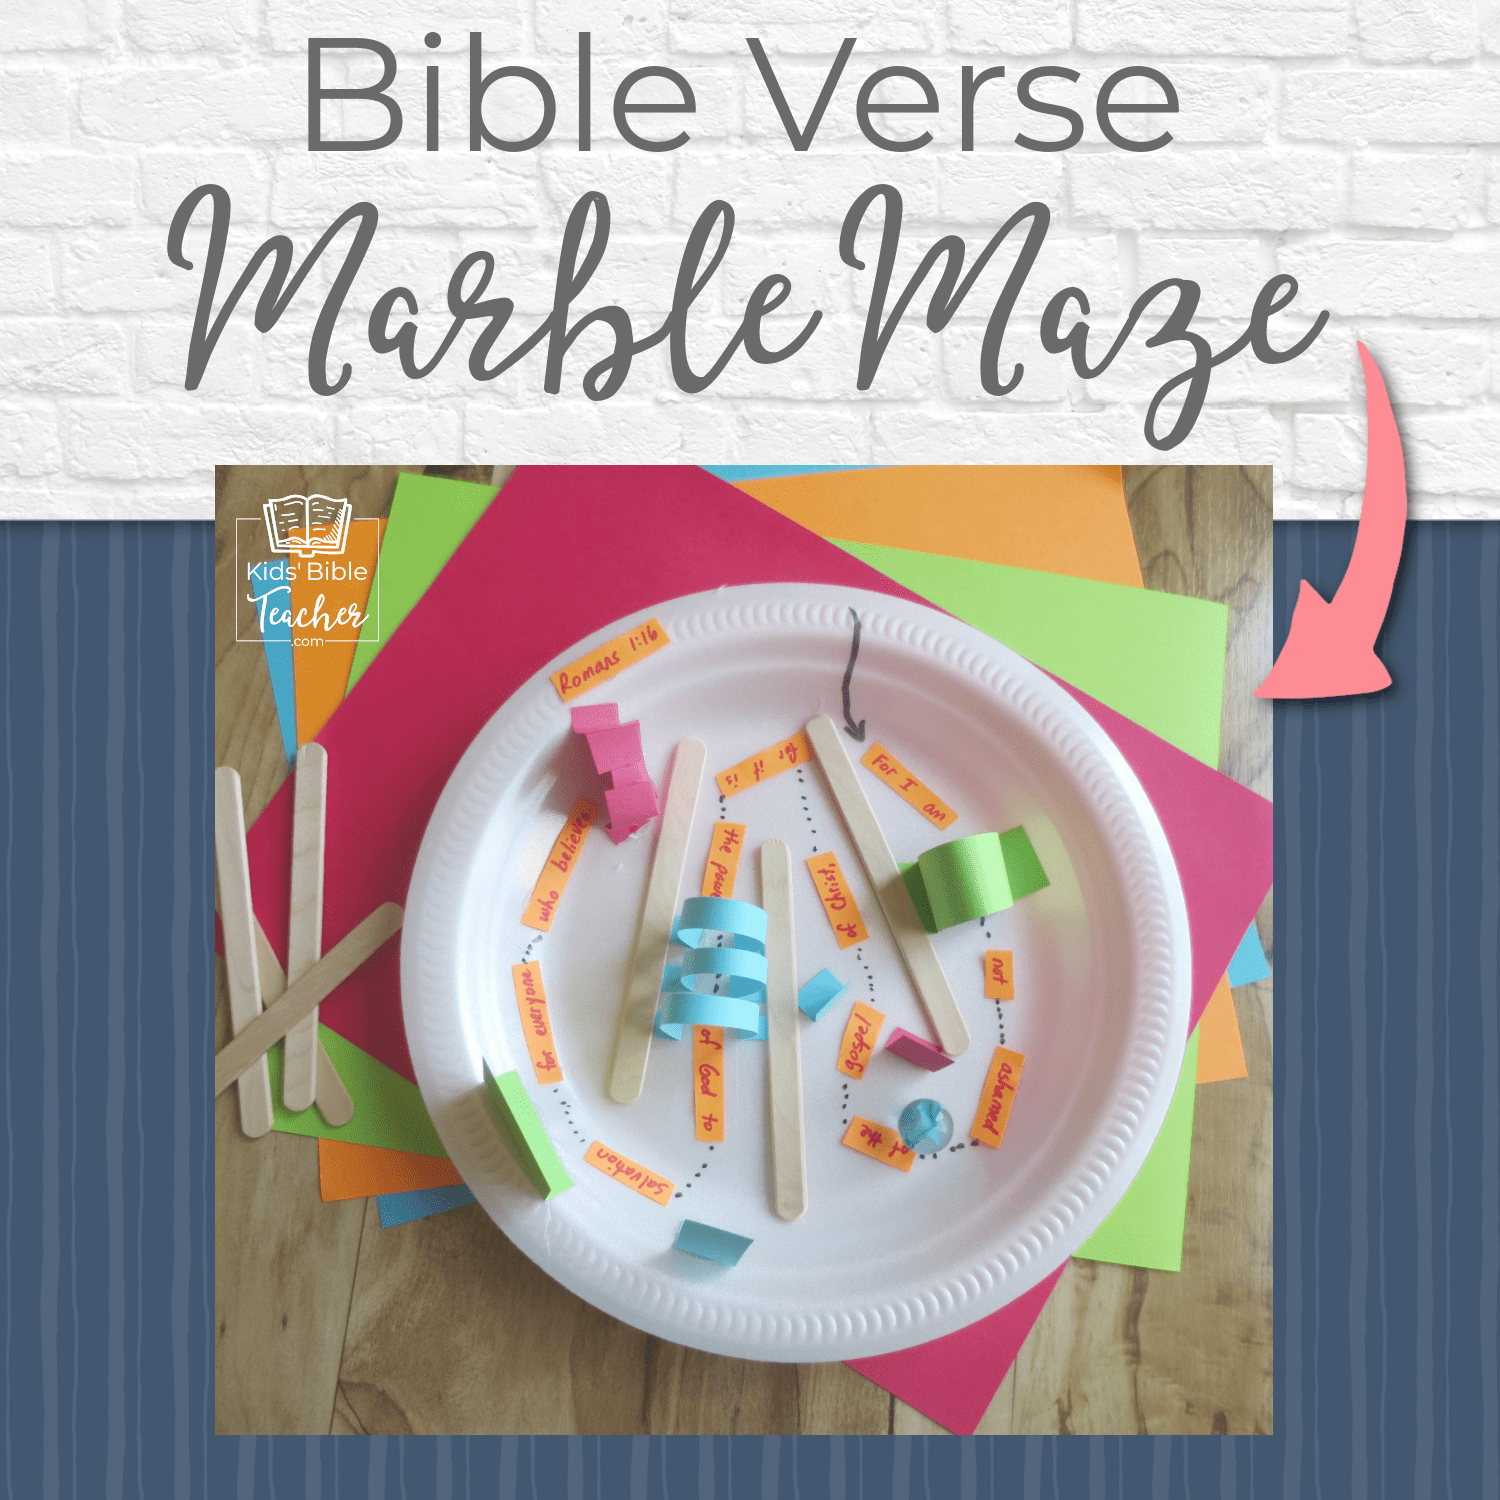 Looking for a super-fun, Sunday School craft that boys and girls will love? Try this Paper Plate Bible Verse Marble Maze. - This is such a cool idea!